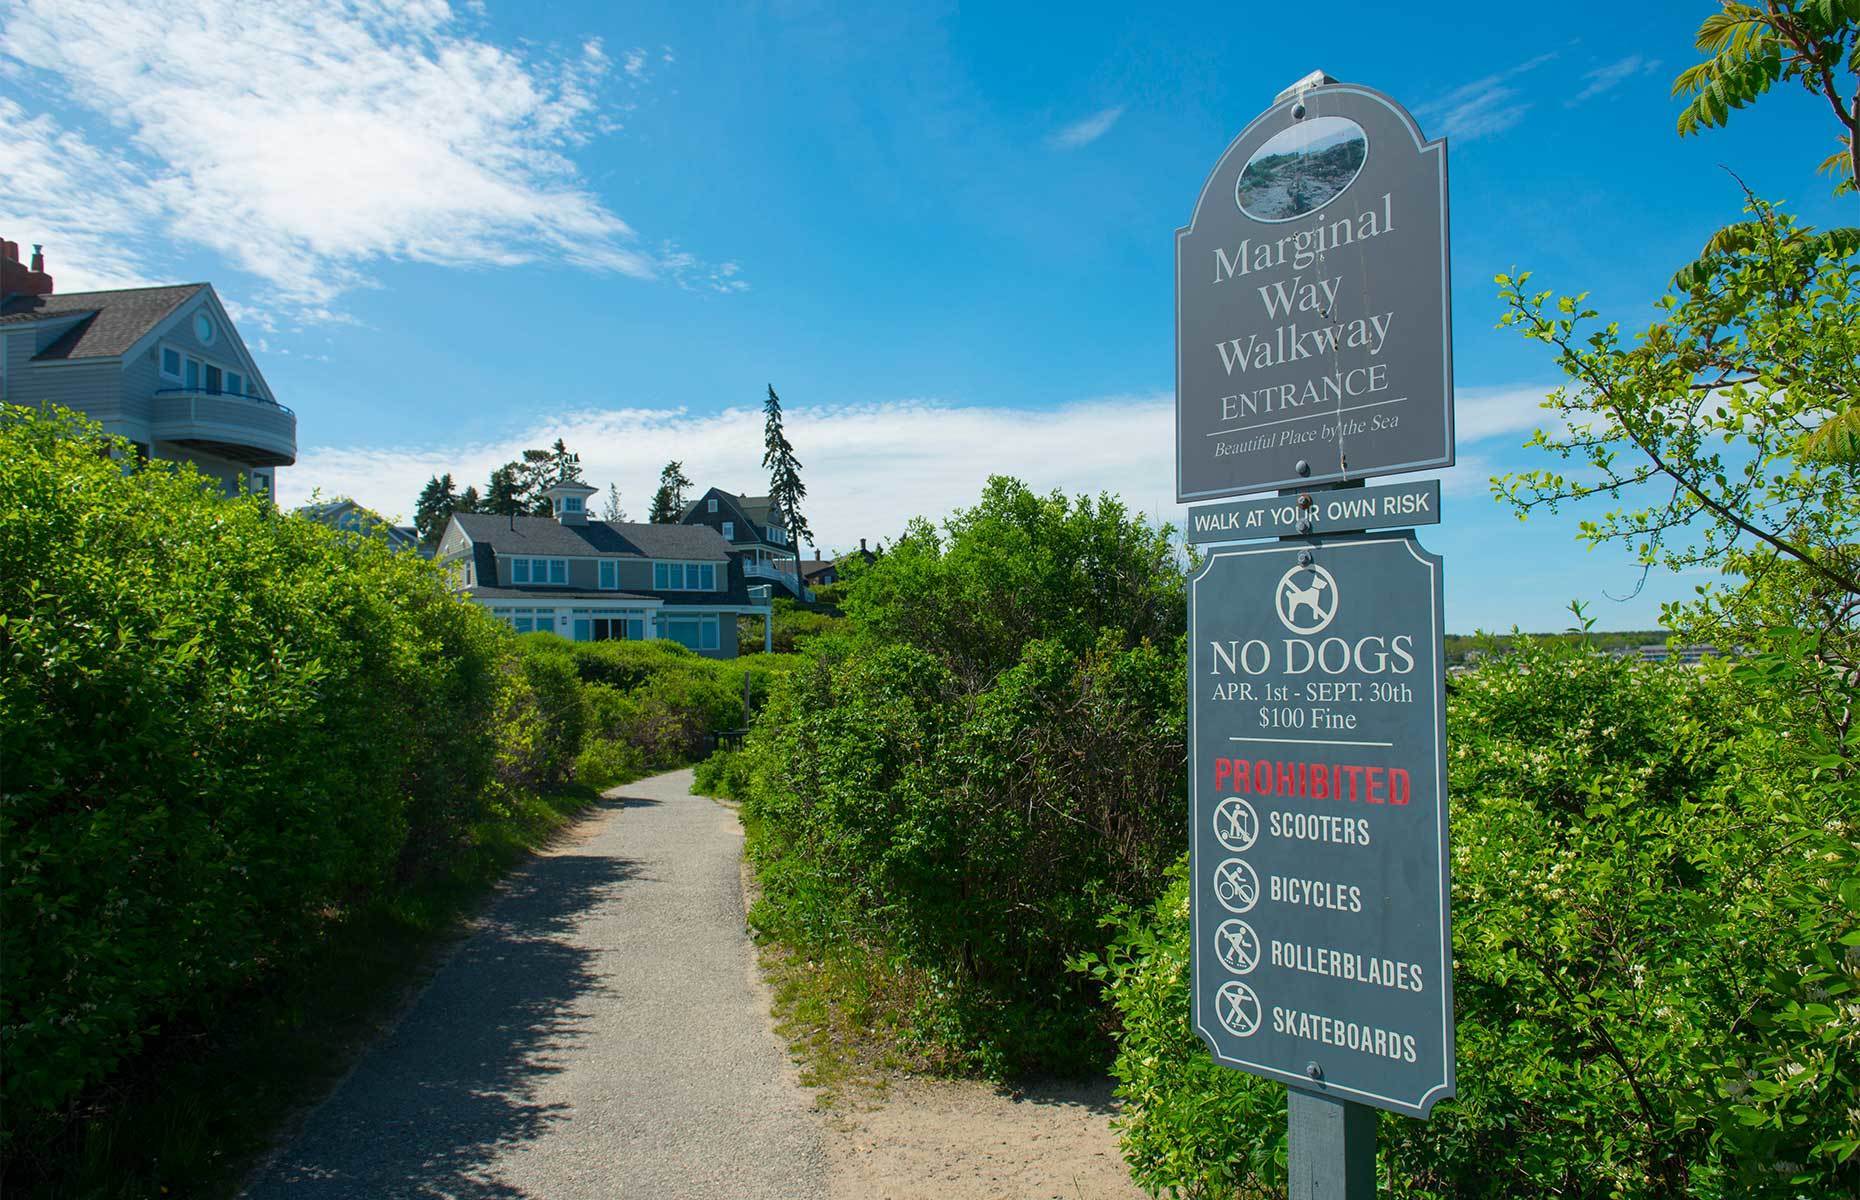 <p class="p1"><span>For those who enjoy a good walk, check out this fantastic path along the Maine coastline. A full circuit (round trip) totals <a href="https://www.marginalwayfund.org/marginal-way/faq/" rel="noreferrer noopener"><span>just over 4 km</span></a>. According to <a href="https://www.marginalwayfund.org/marginal-way/map/" rel="noreferrer noopener"><span>the map</span></a>, however, you can access the trail at several points. Benches found along the path invite strollers to pause and admire the superb ocean view.</span></p>